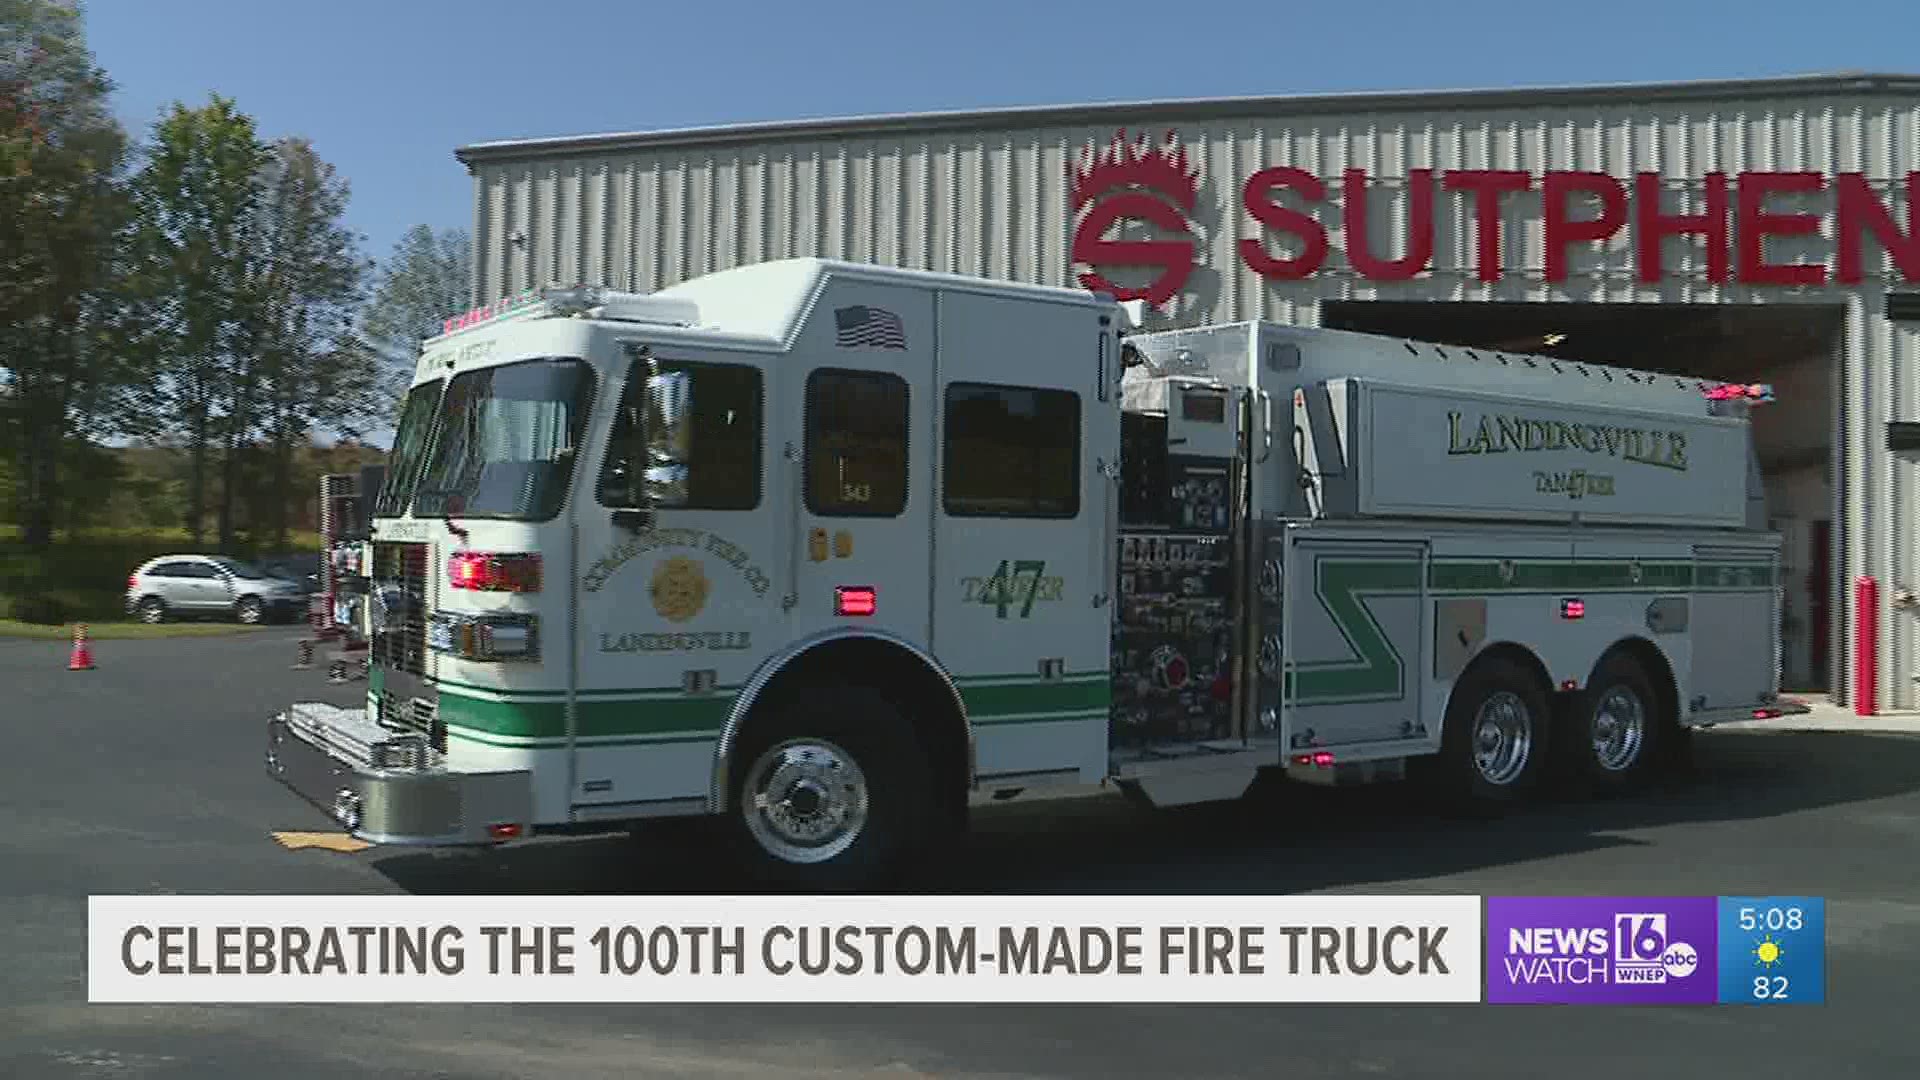 A corporation in Wayne County that manufactures fire apparatus celebrated a huge milestone —the 100th firetruck was completed.